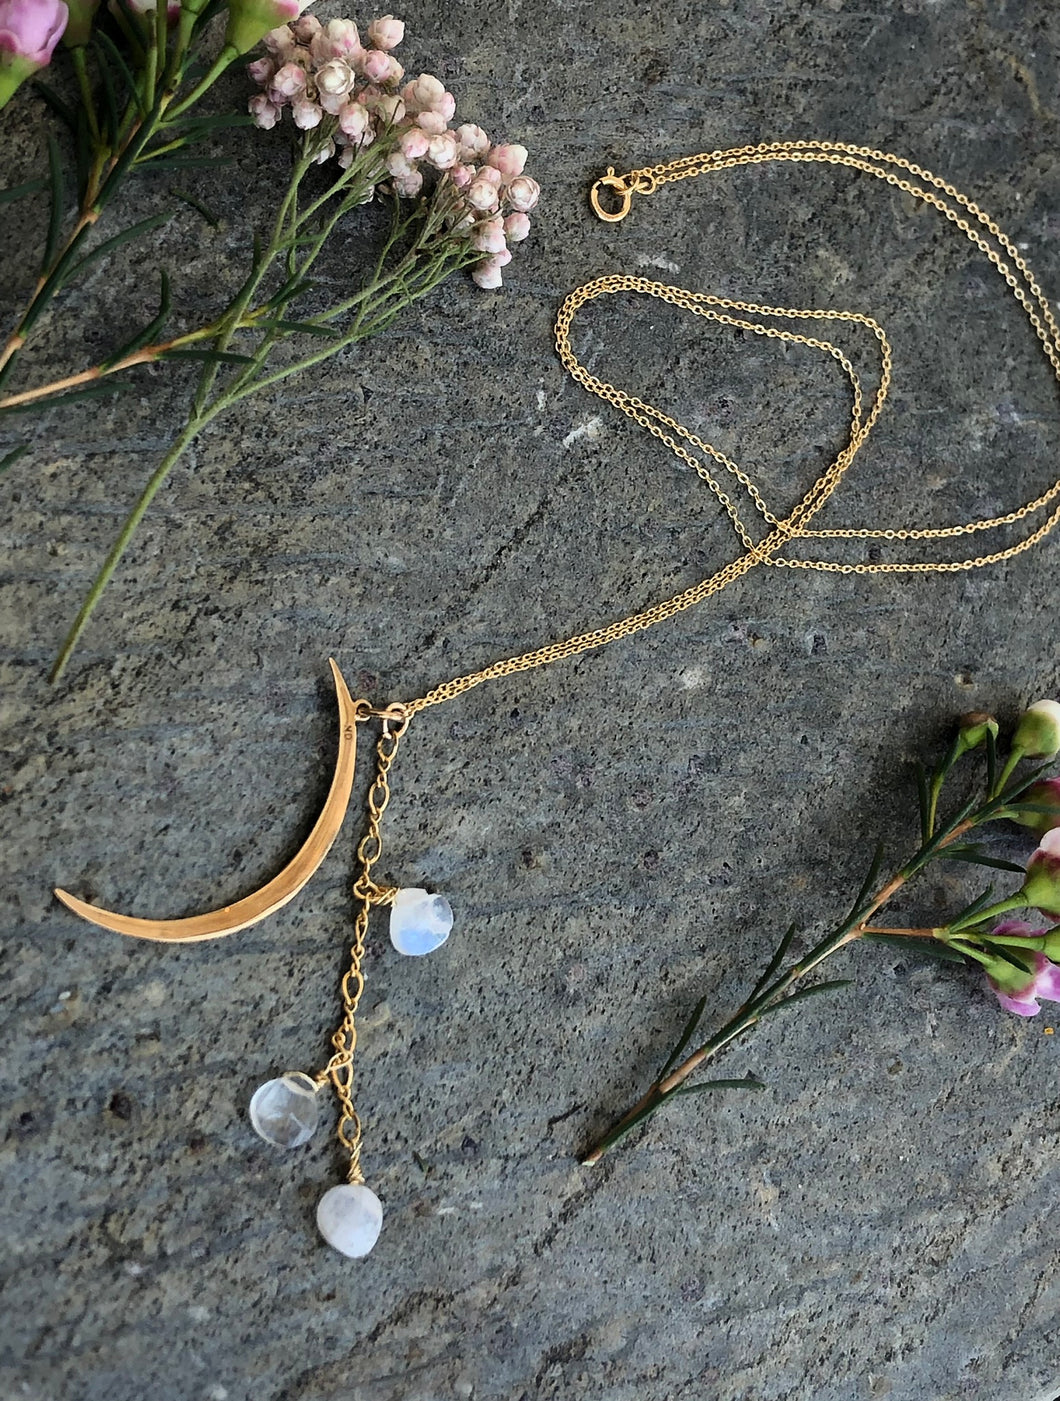 Gold Crescent Moon Pendant Necklace with Moonstone